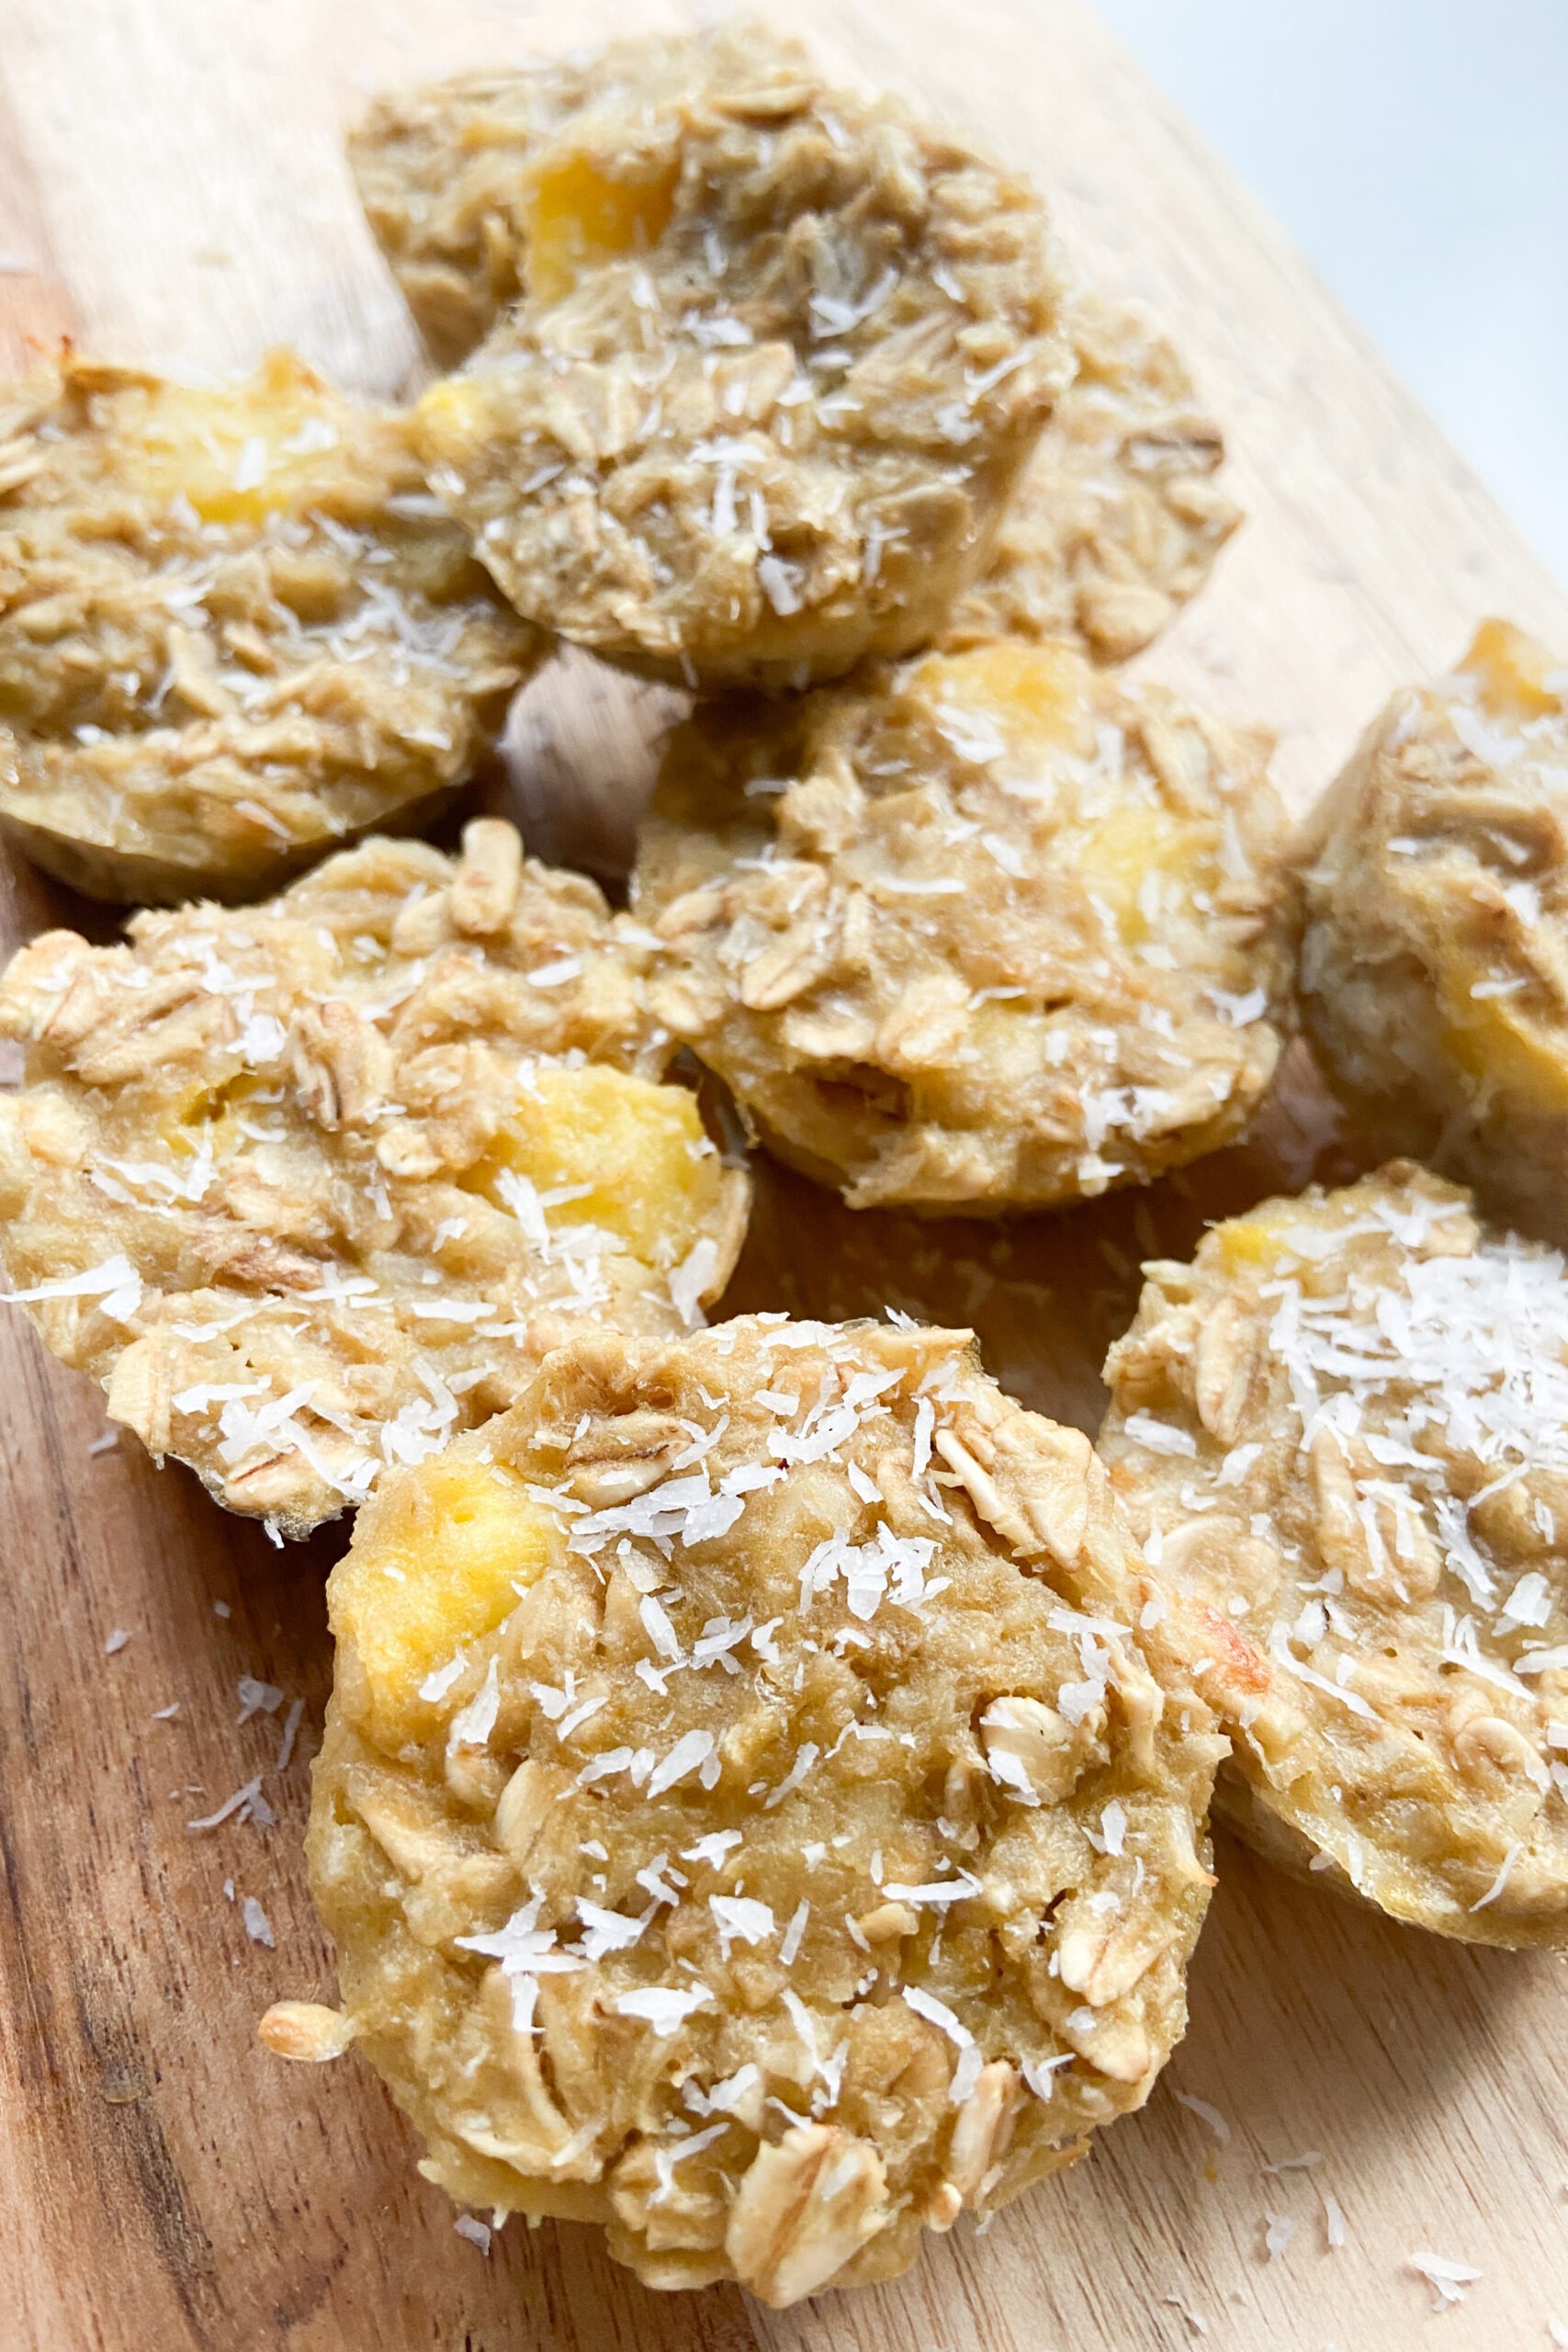 Mango banana oat bites with a sprinkle of coconut on top